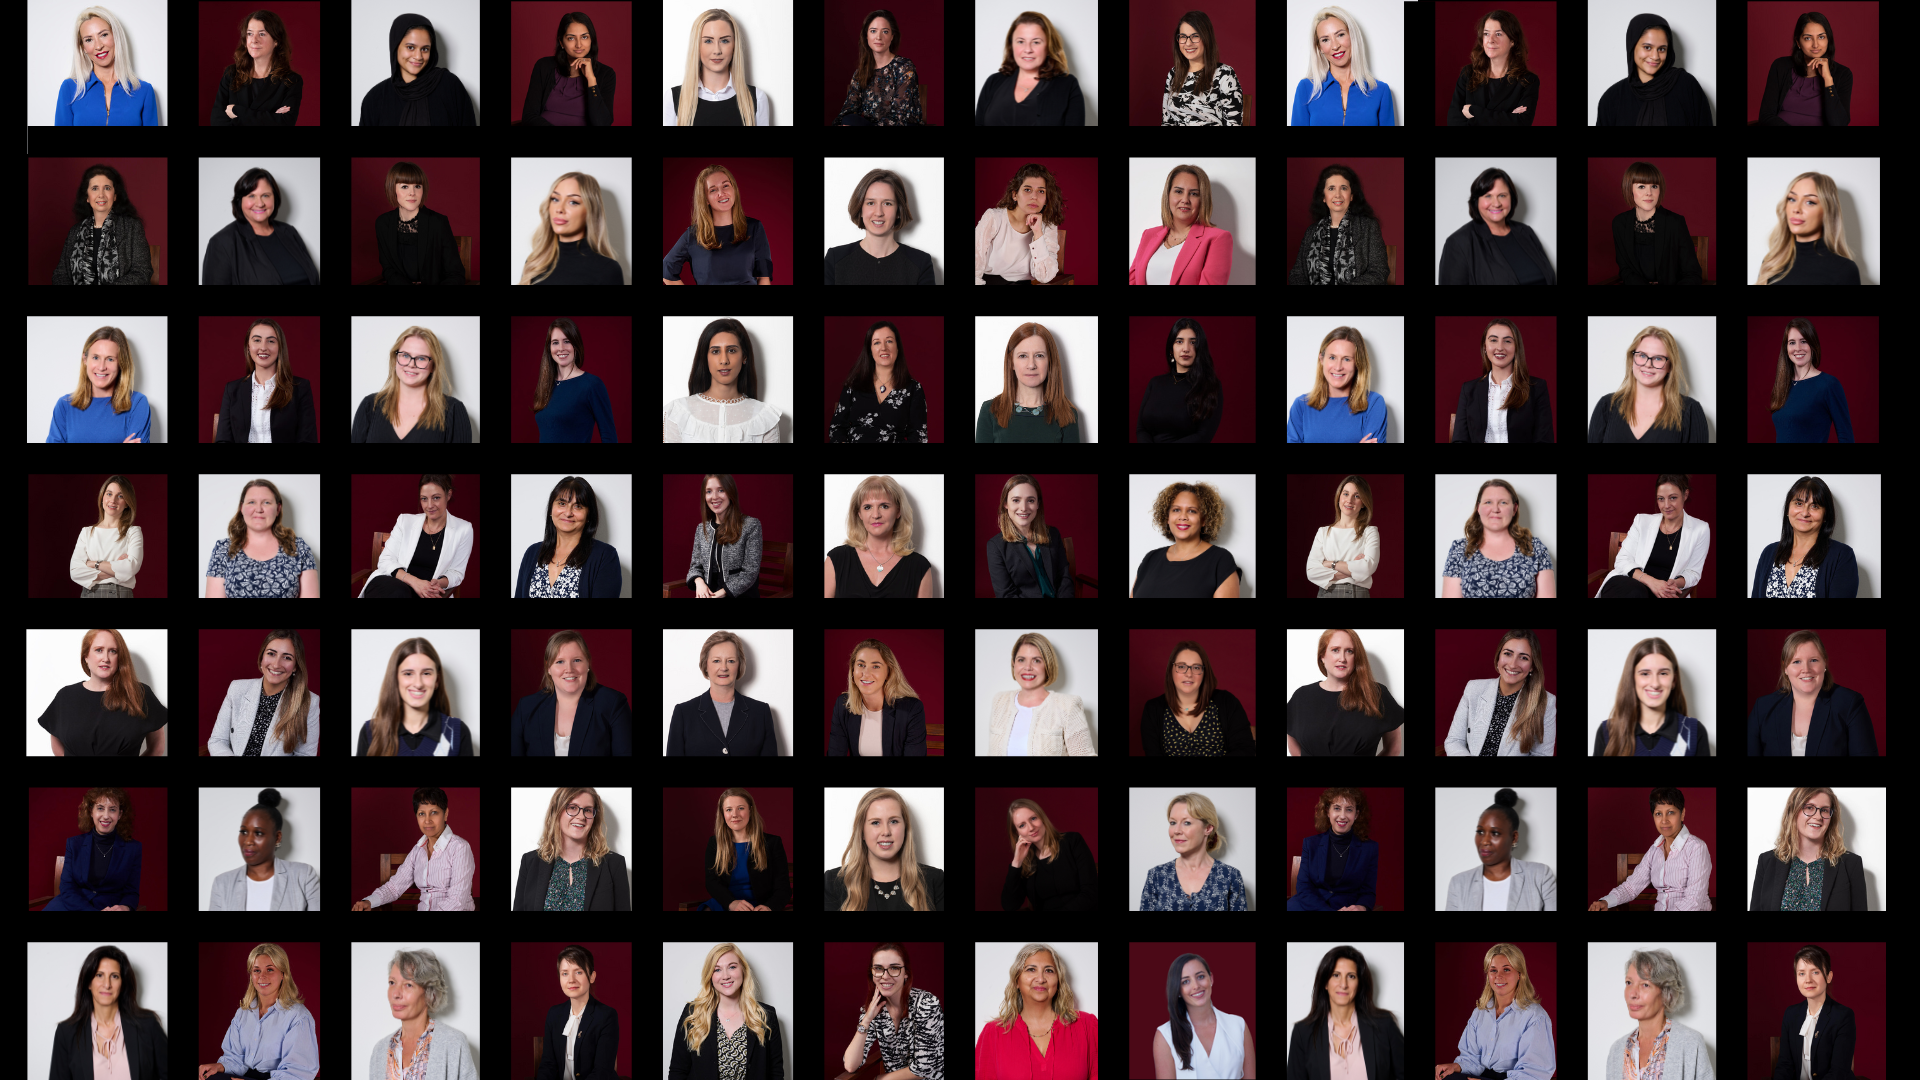 CB’s HigHer network: elevating women in the workplace